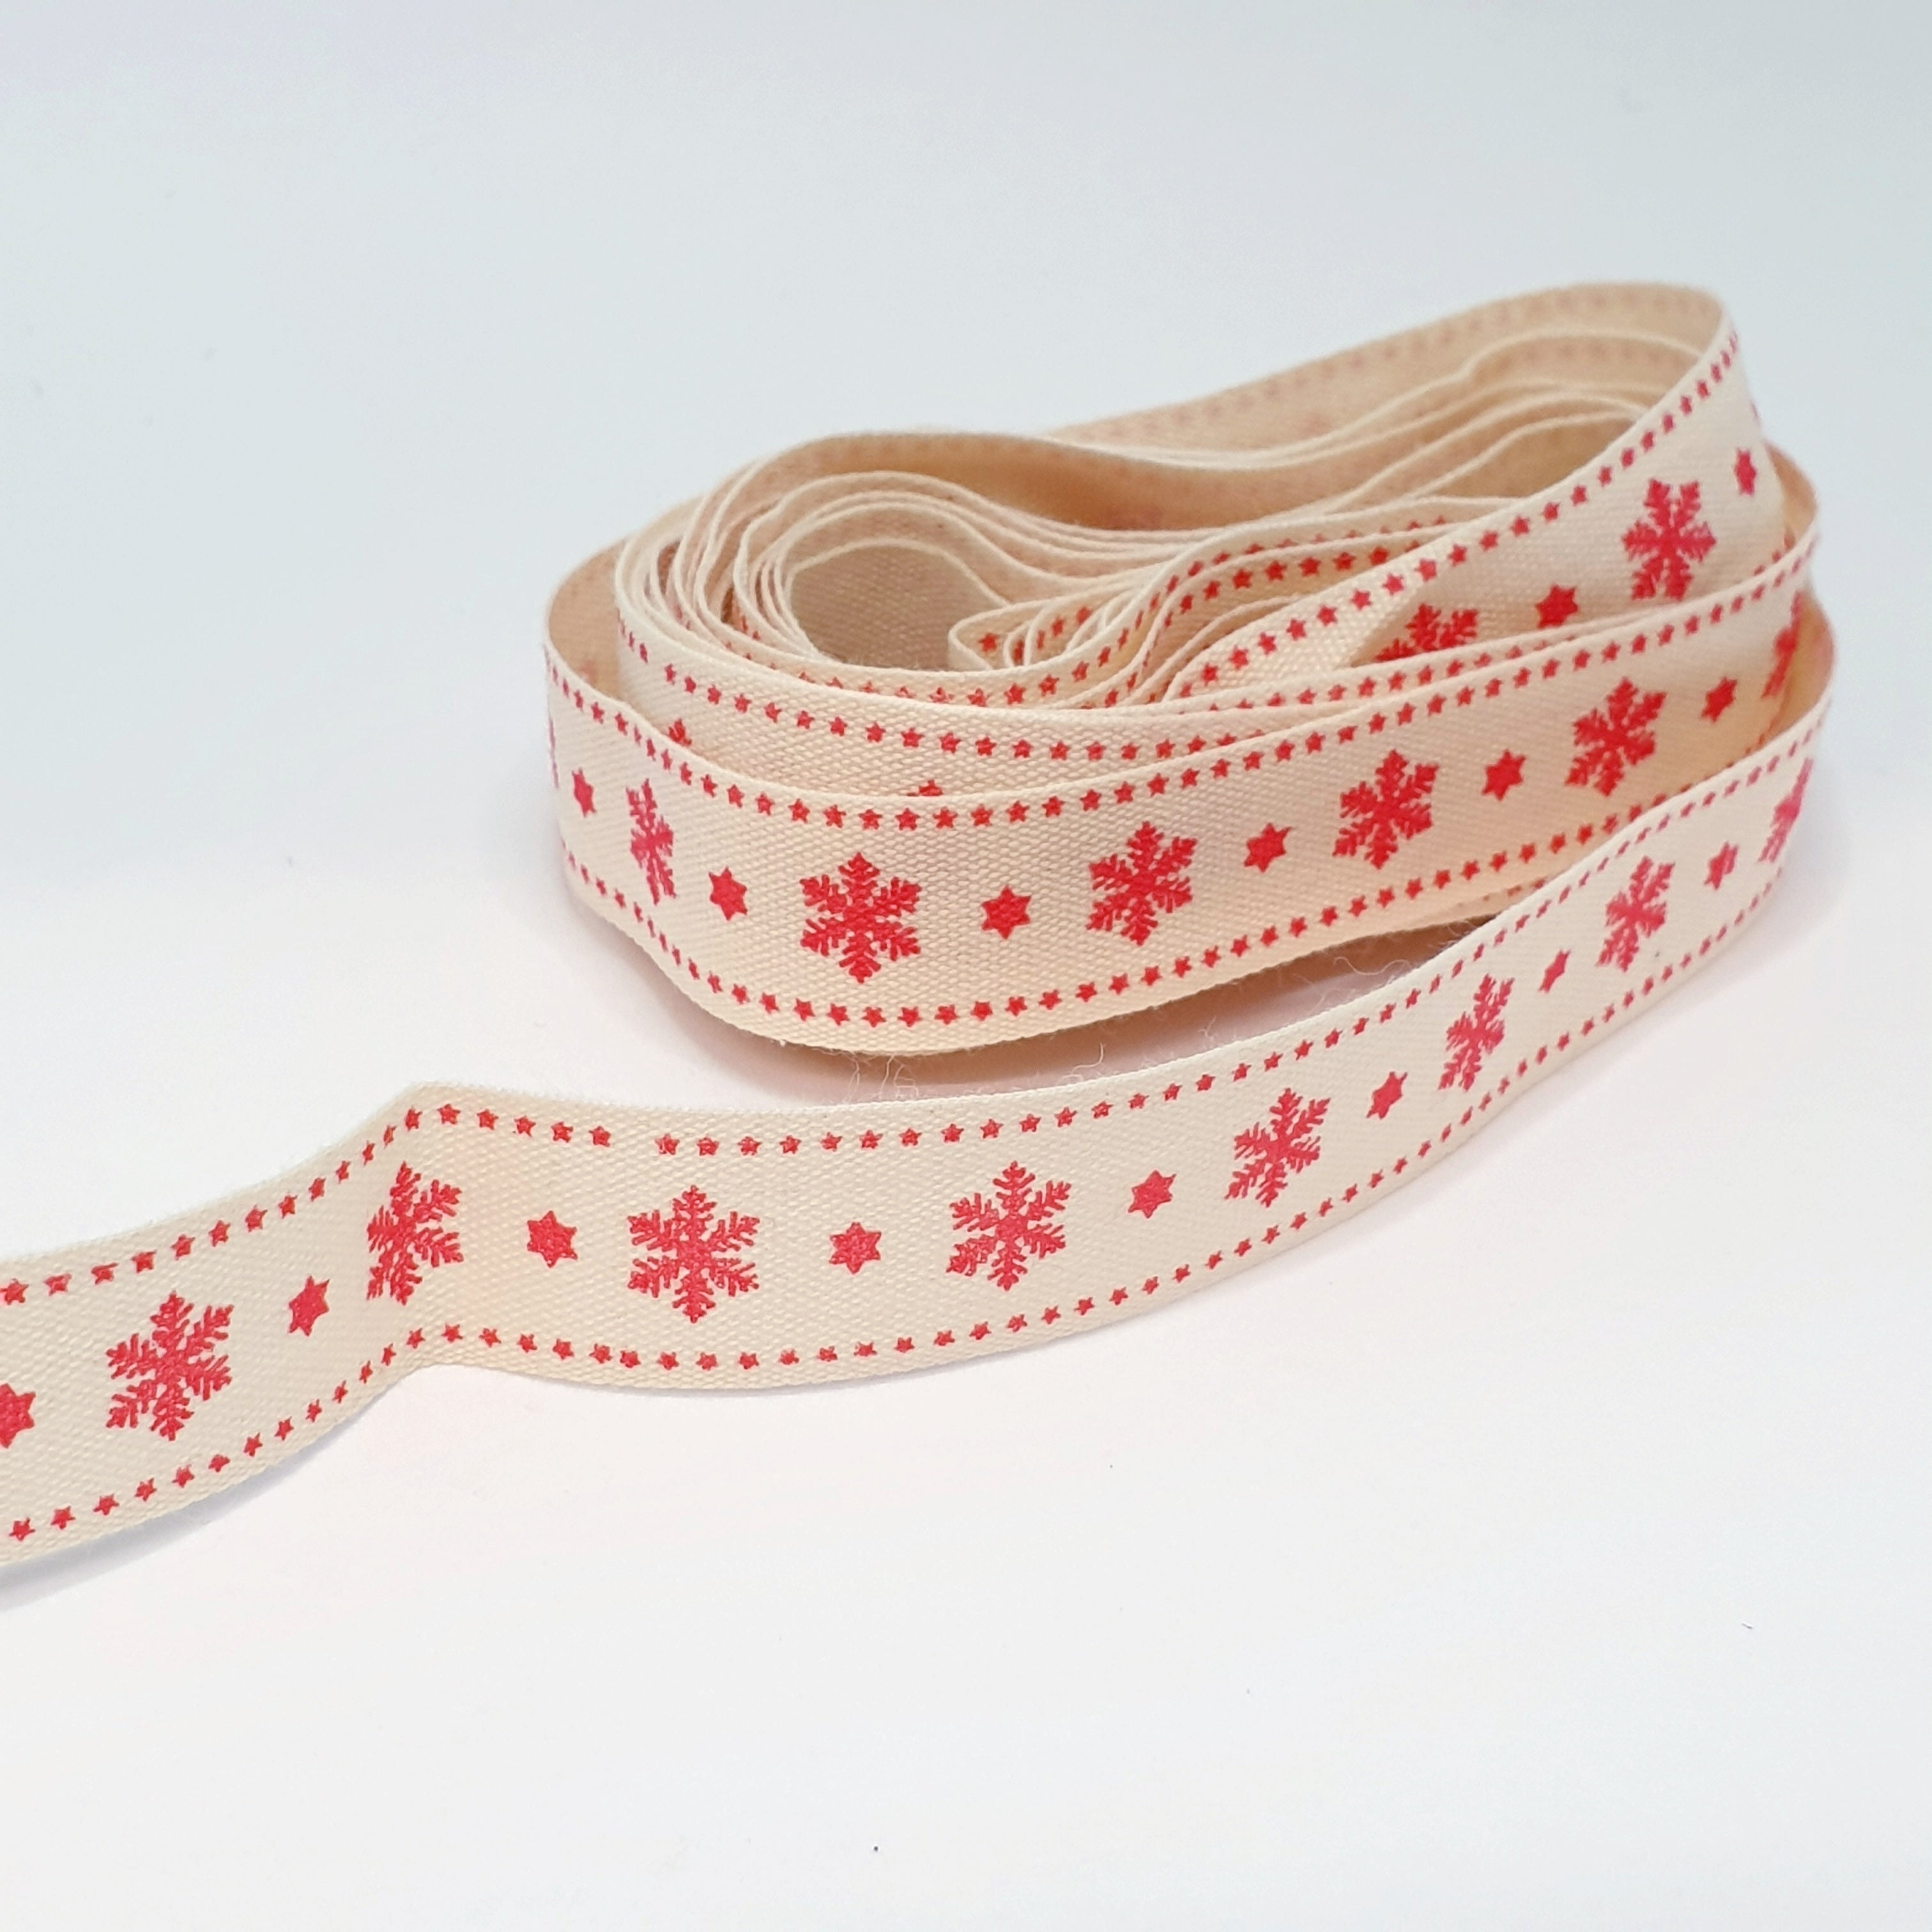 MajorCrafts 4.5m 5yds - 15mm wide Red Snowflake Christmas Cotton Fabric Ribbon